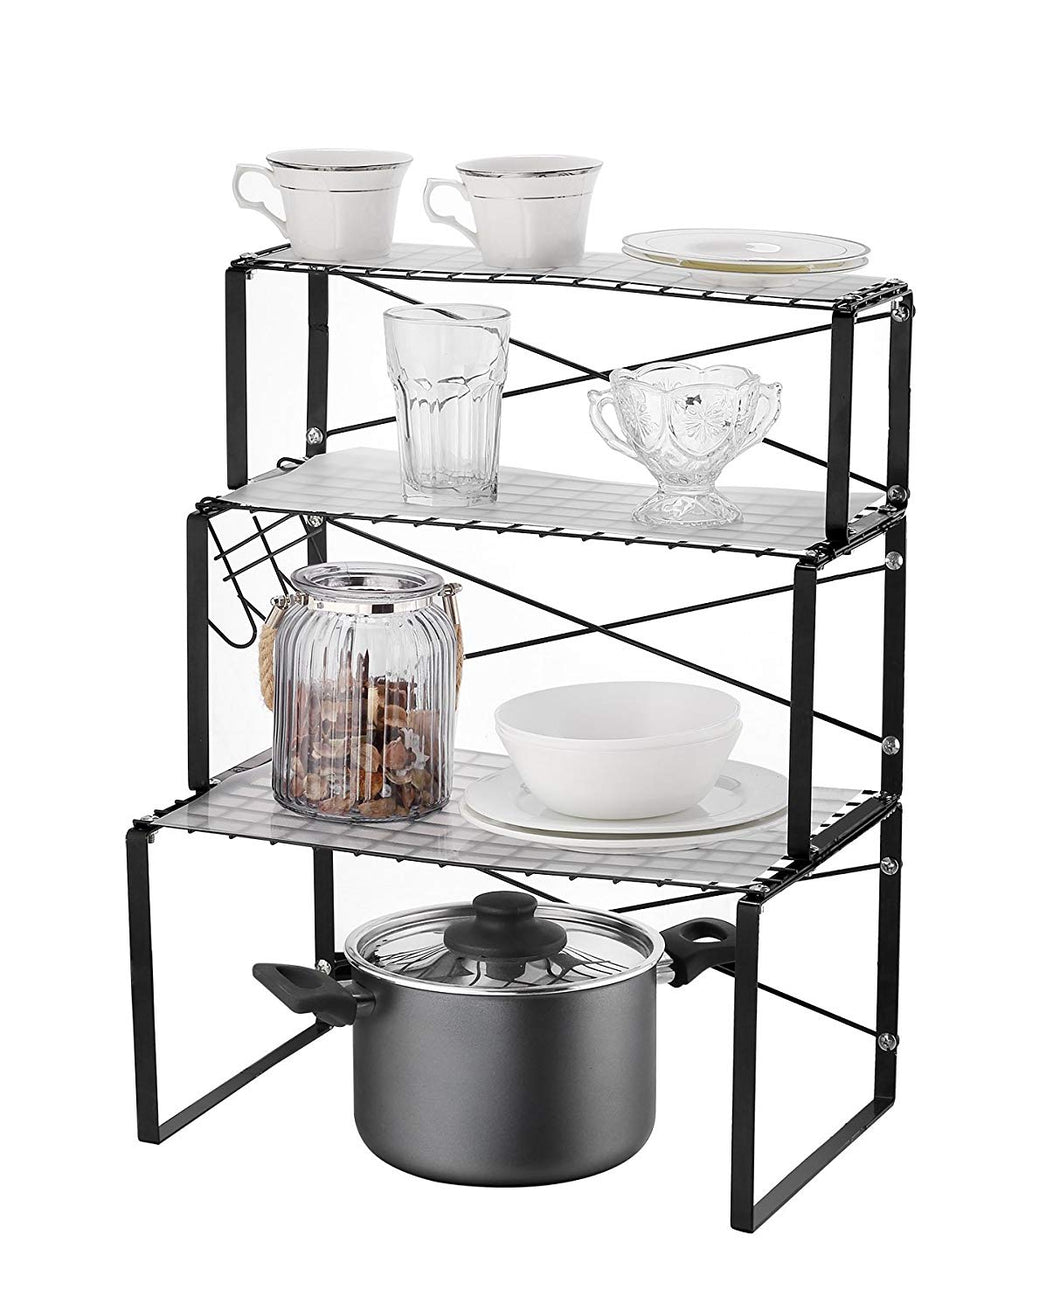 Multi-use 3 Tier Kitchen Cabinet and Counter Shelves Storage Organizer Rack with Hooks and Shelf Liner (Silver)